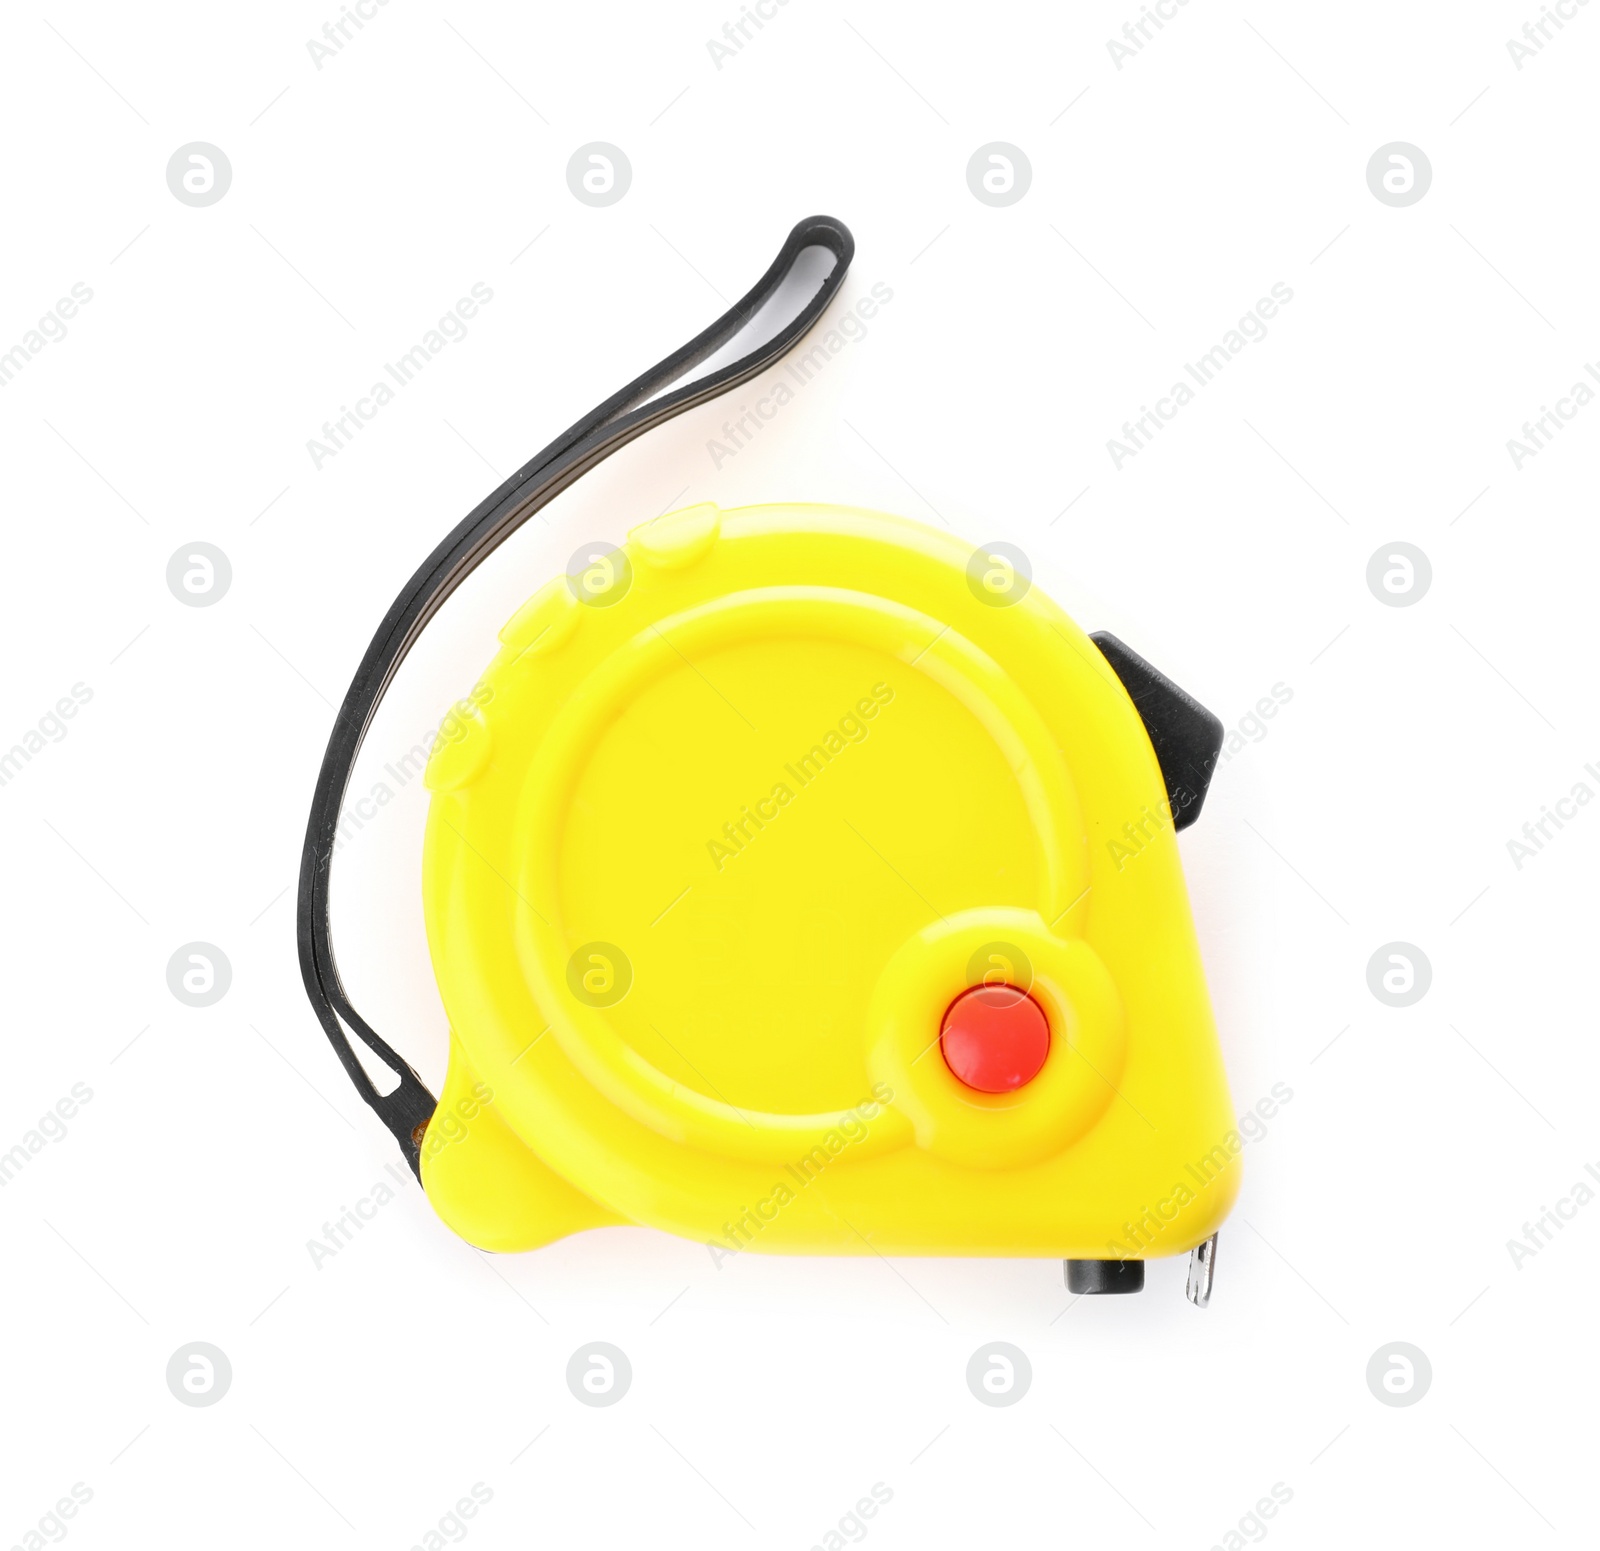 Photo of Tape measure on white background, top view. Electrician's tool